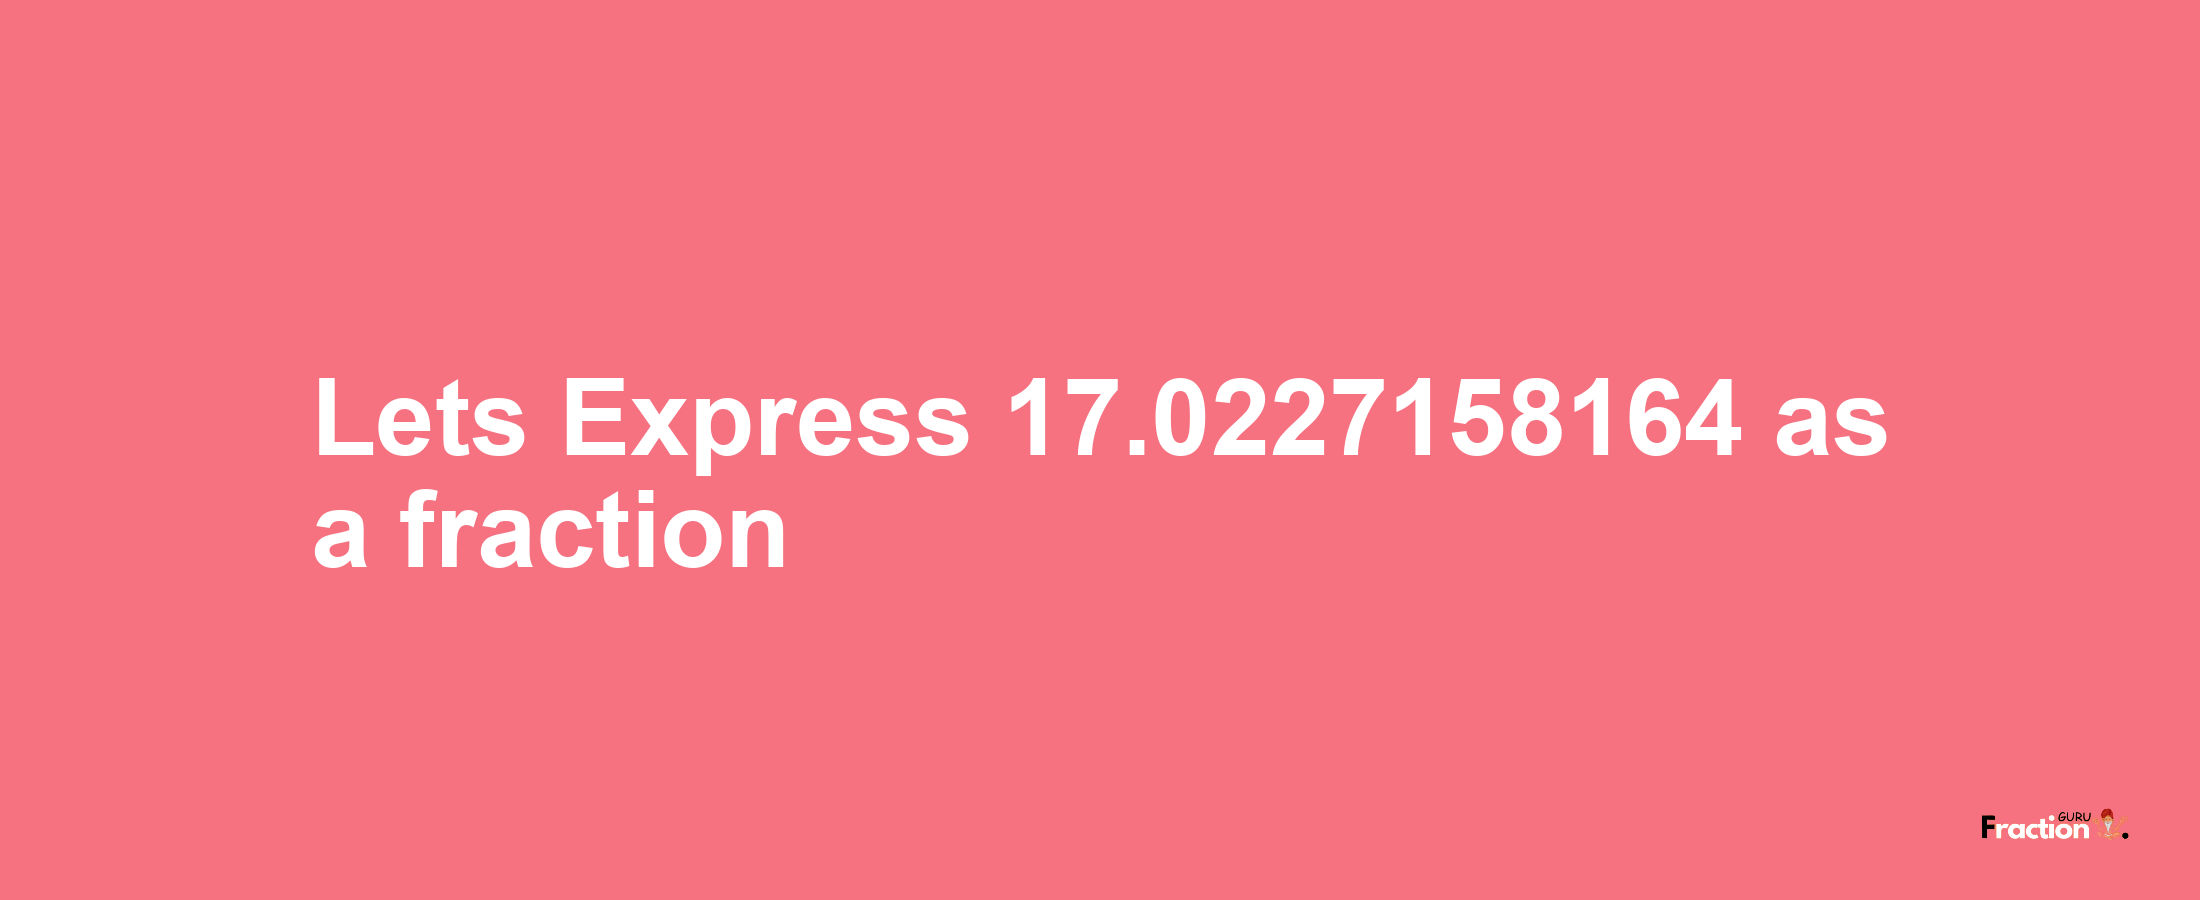 Lets Express 17.0227158164 as afraction